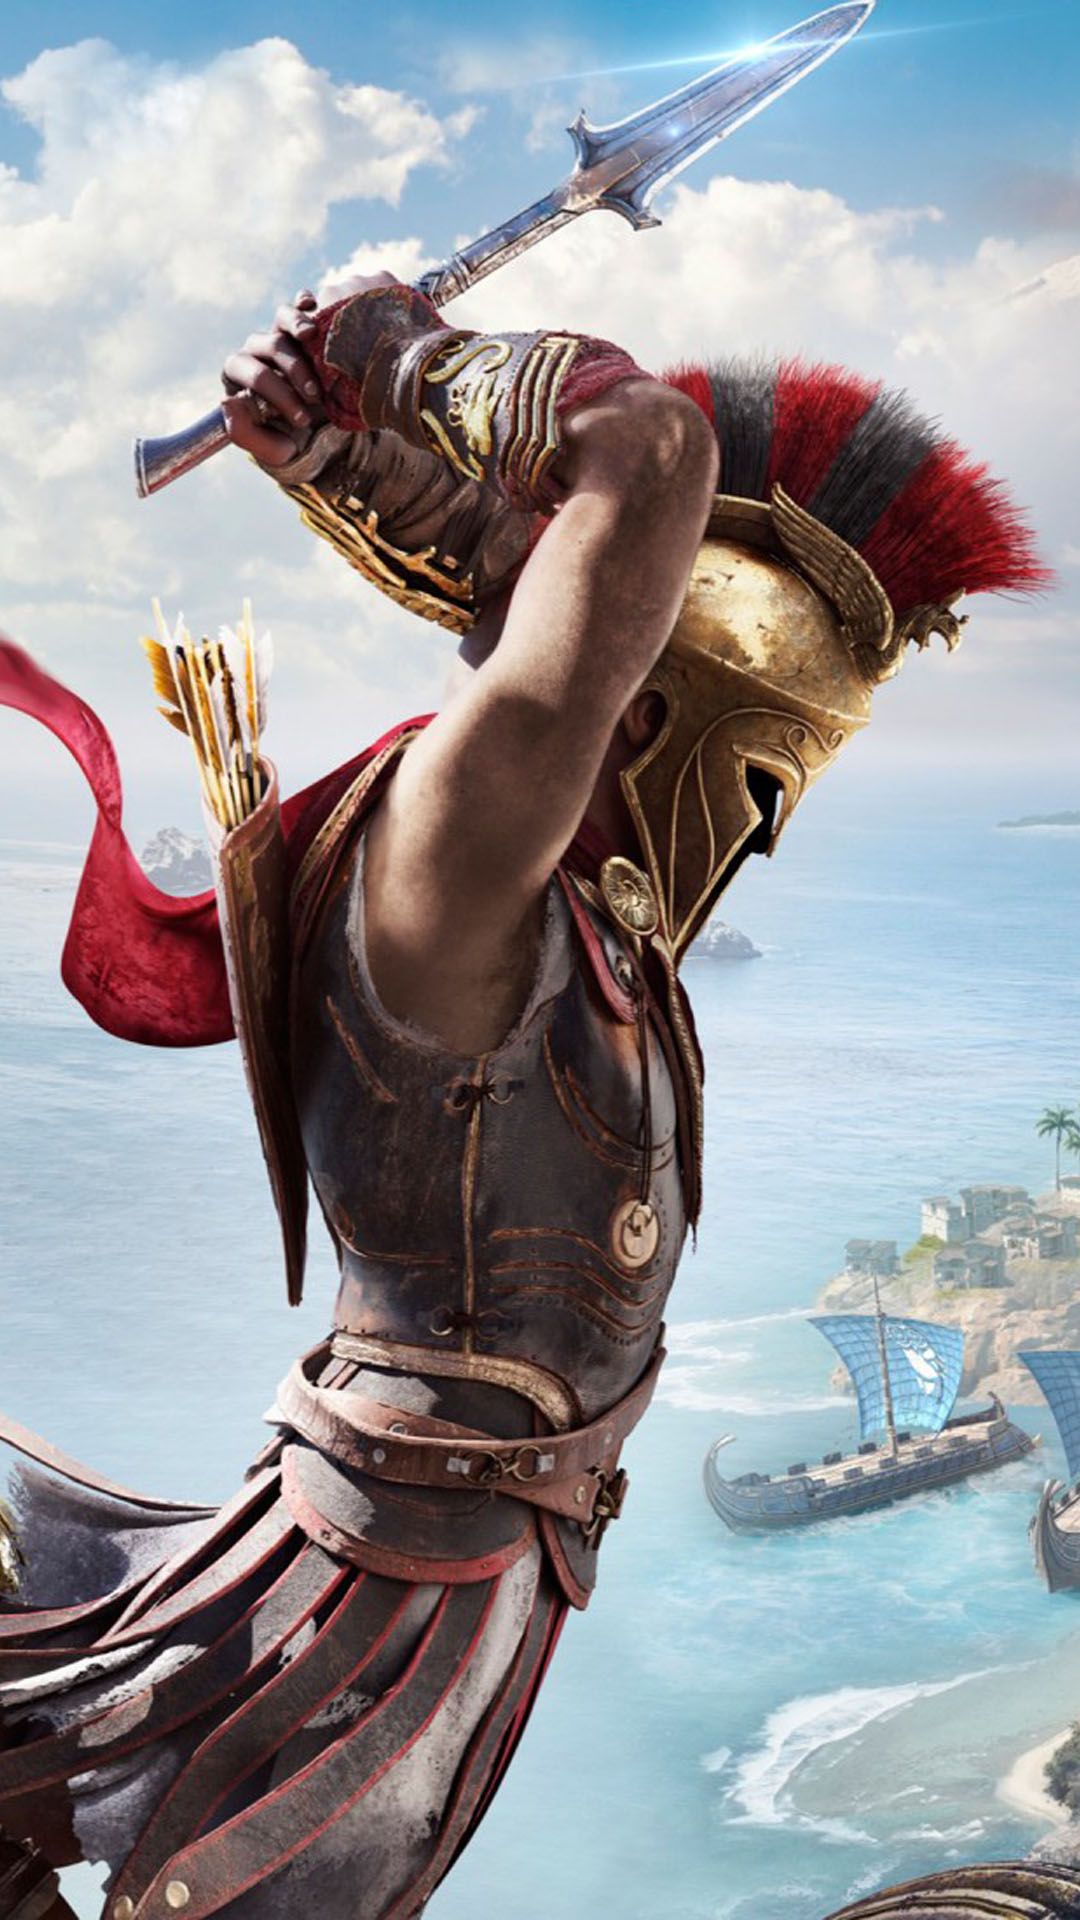 Assassins Creed Odyssey Wallpapers, HD Assassins Creed Odyssey Backgrounds,  Free Images Download